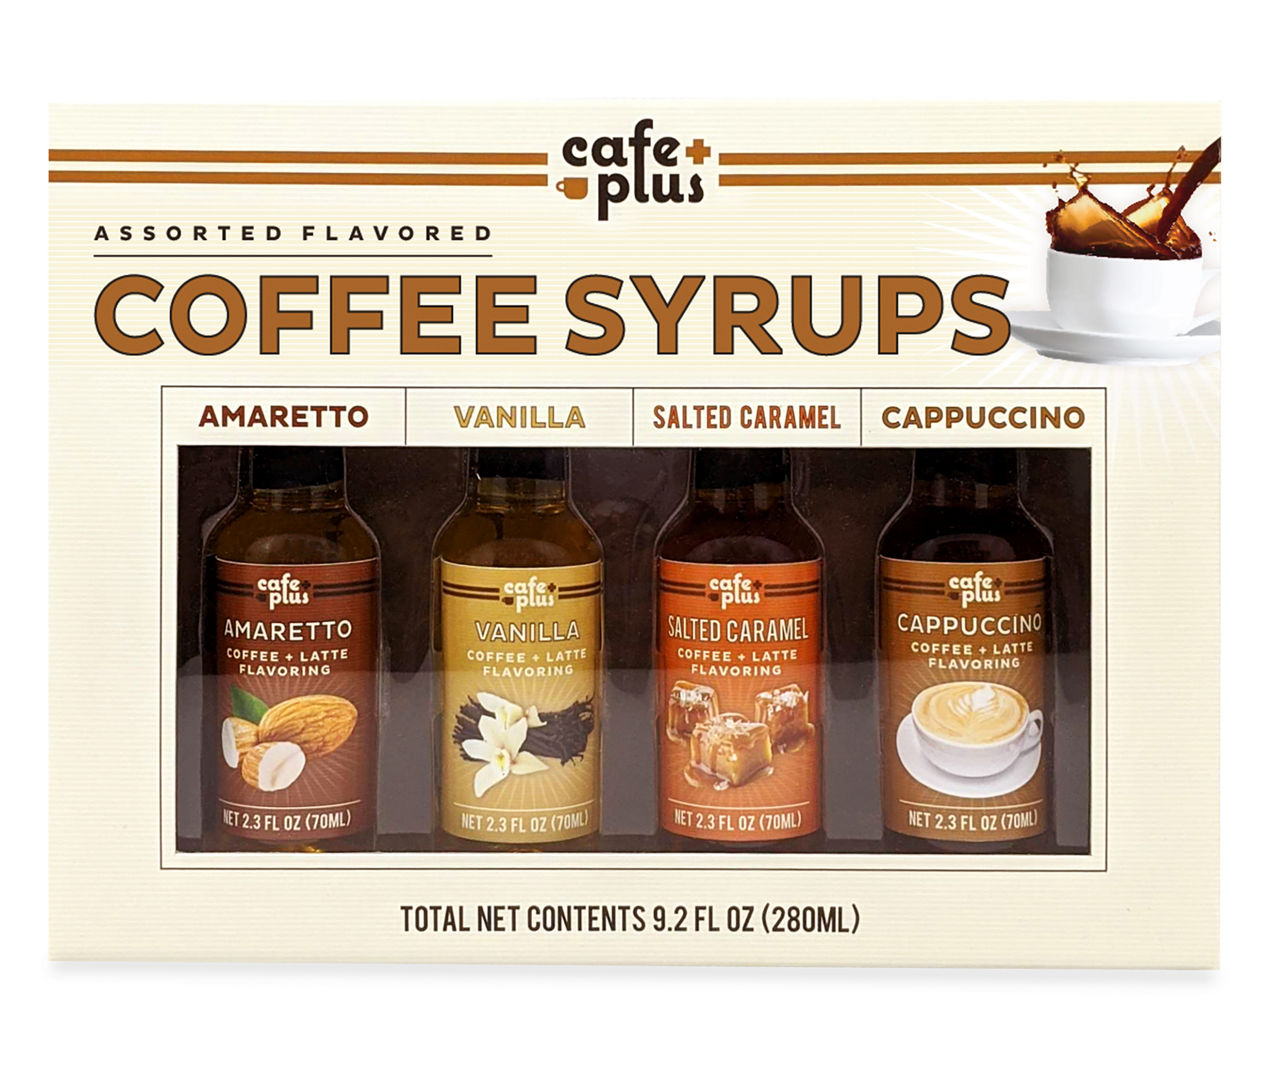 4 Coffee Syrup Flavors